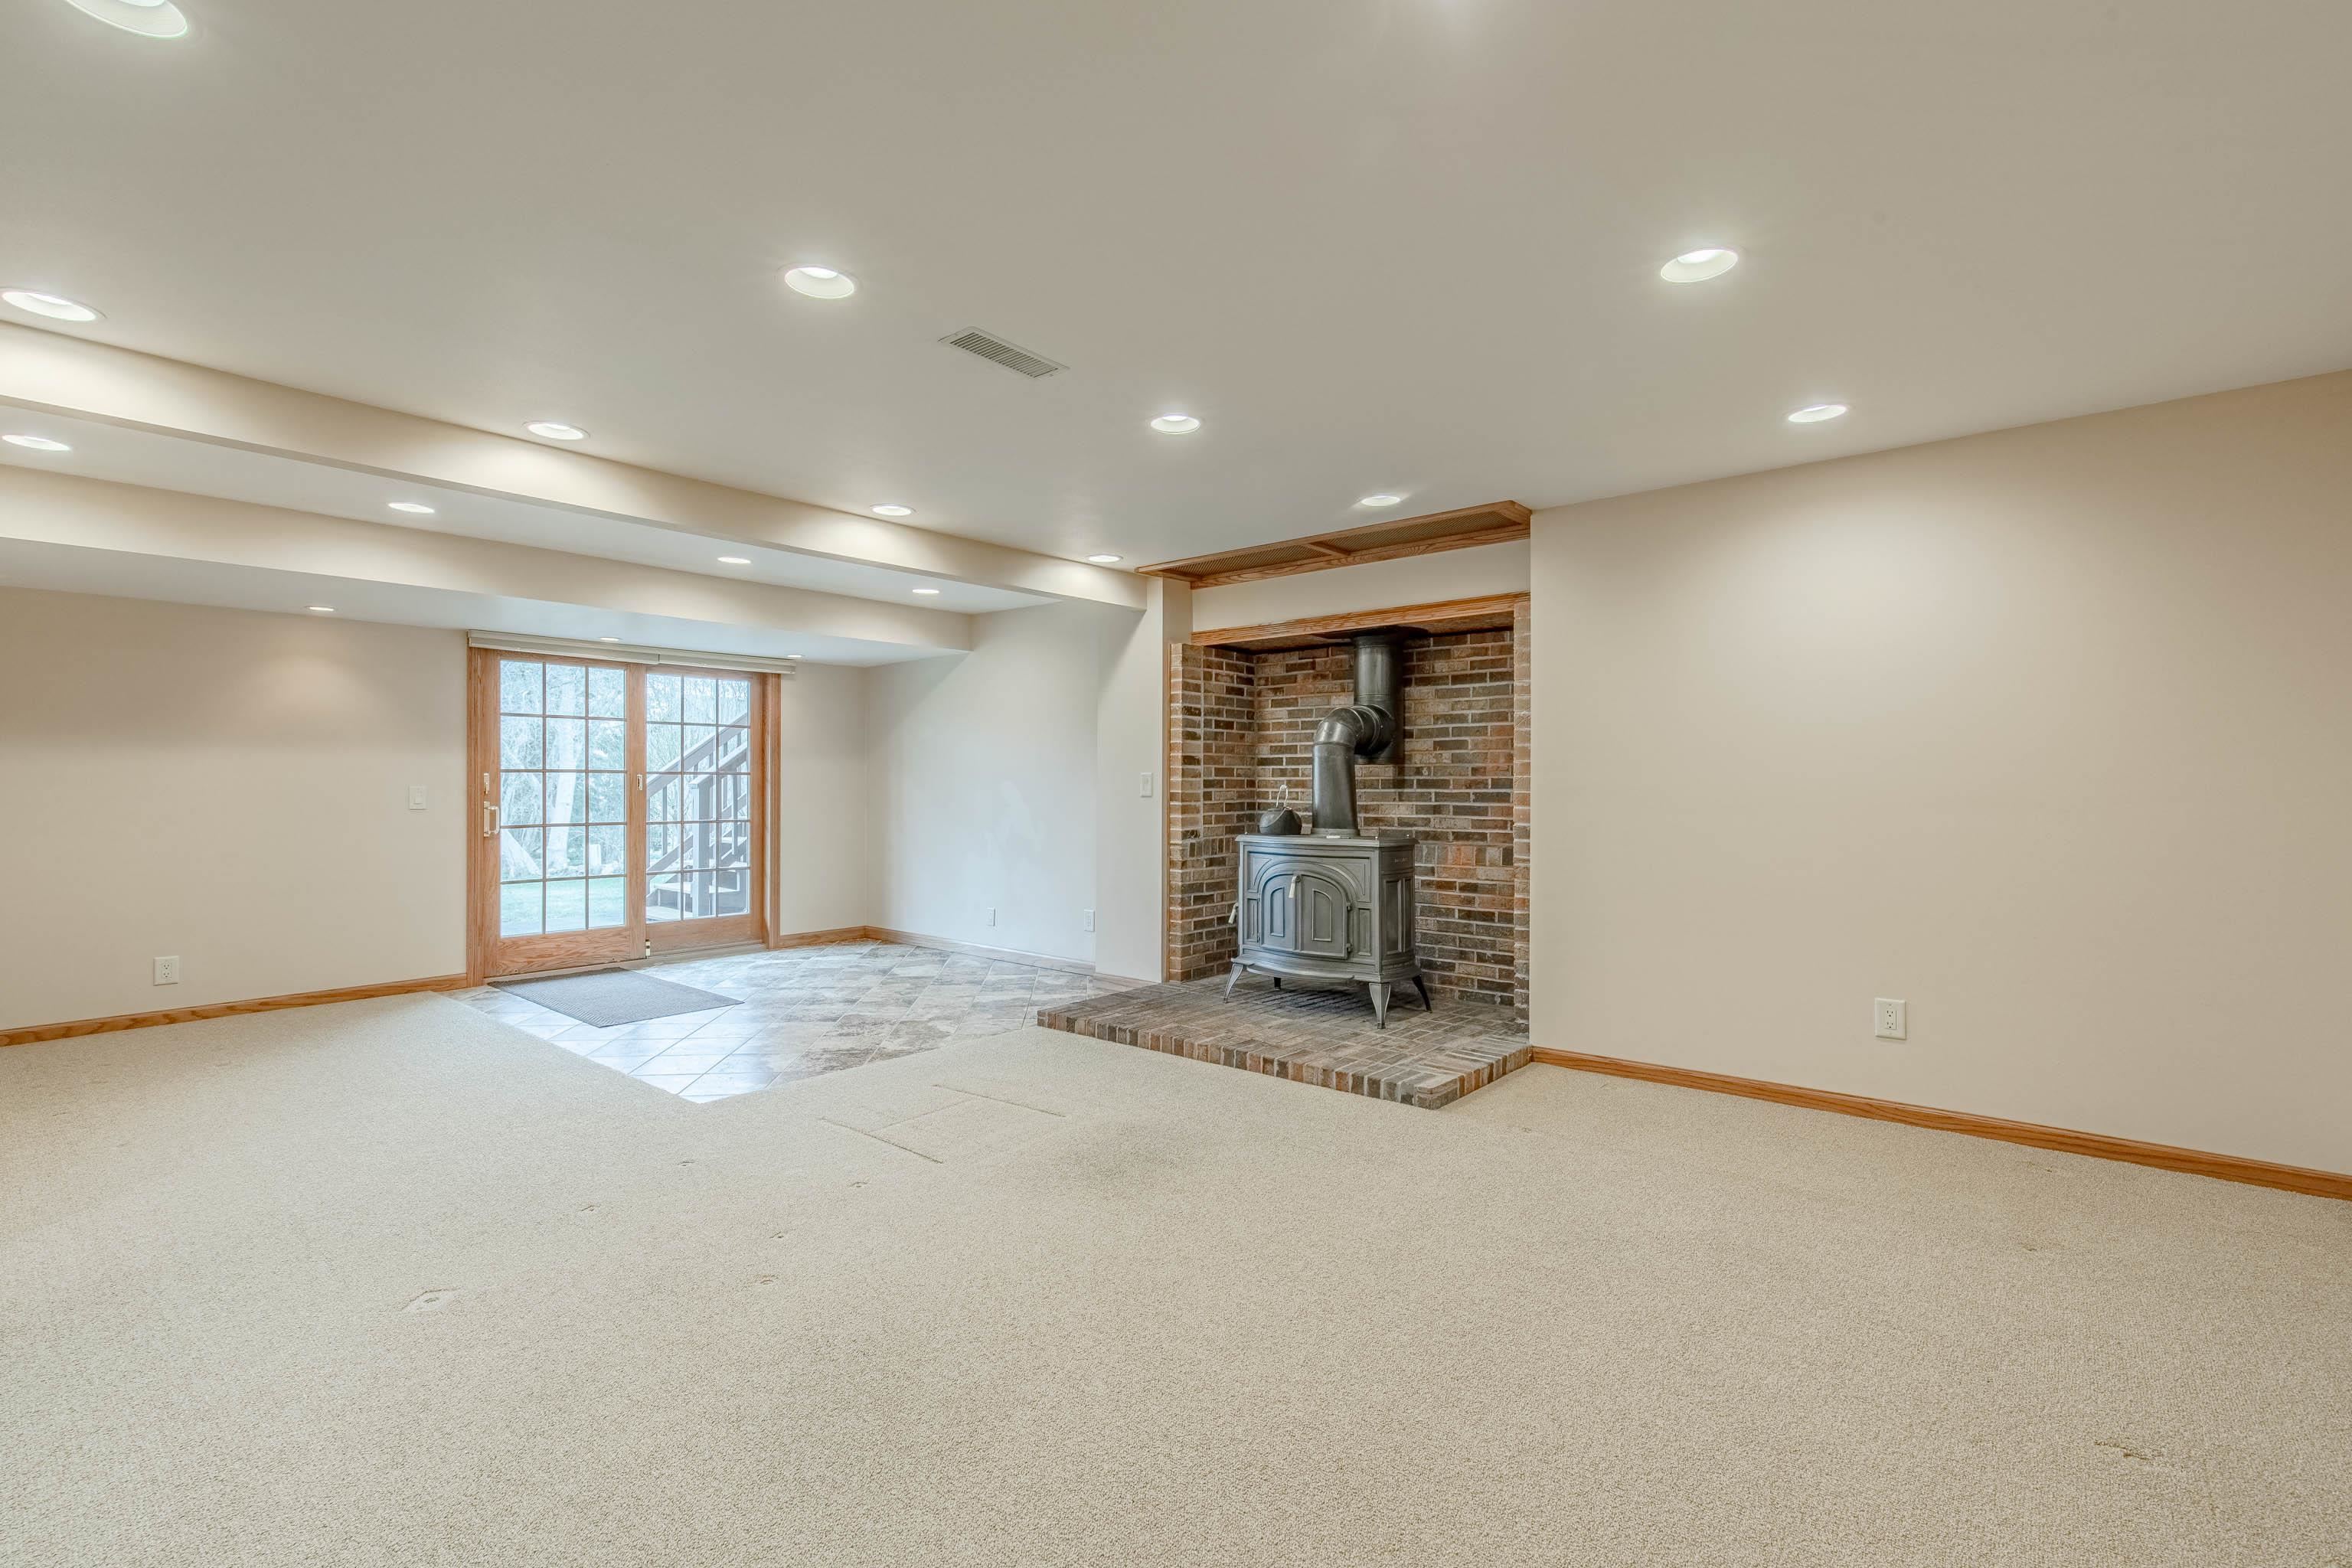 Photo -37 - 5744 Lacy Road Fitchburg, WI 53711